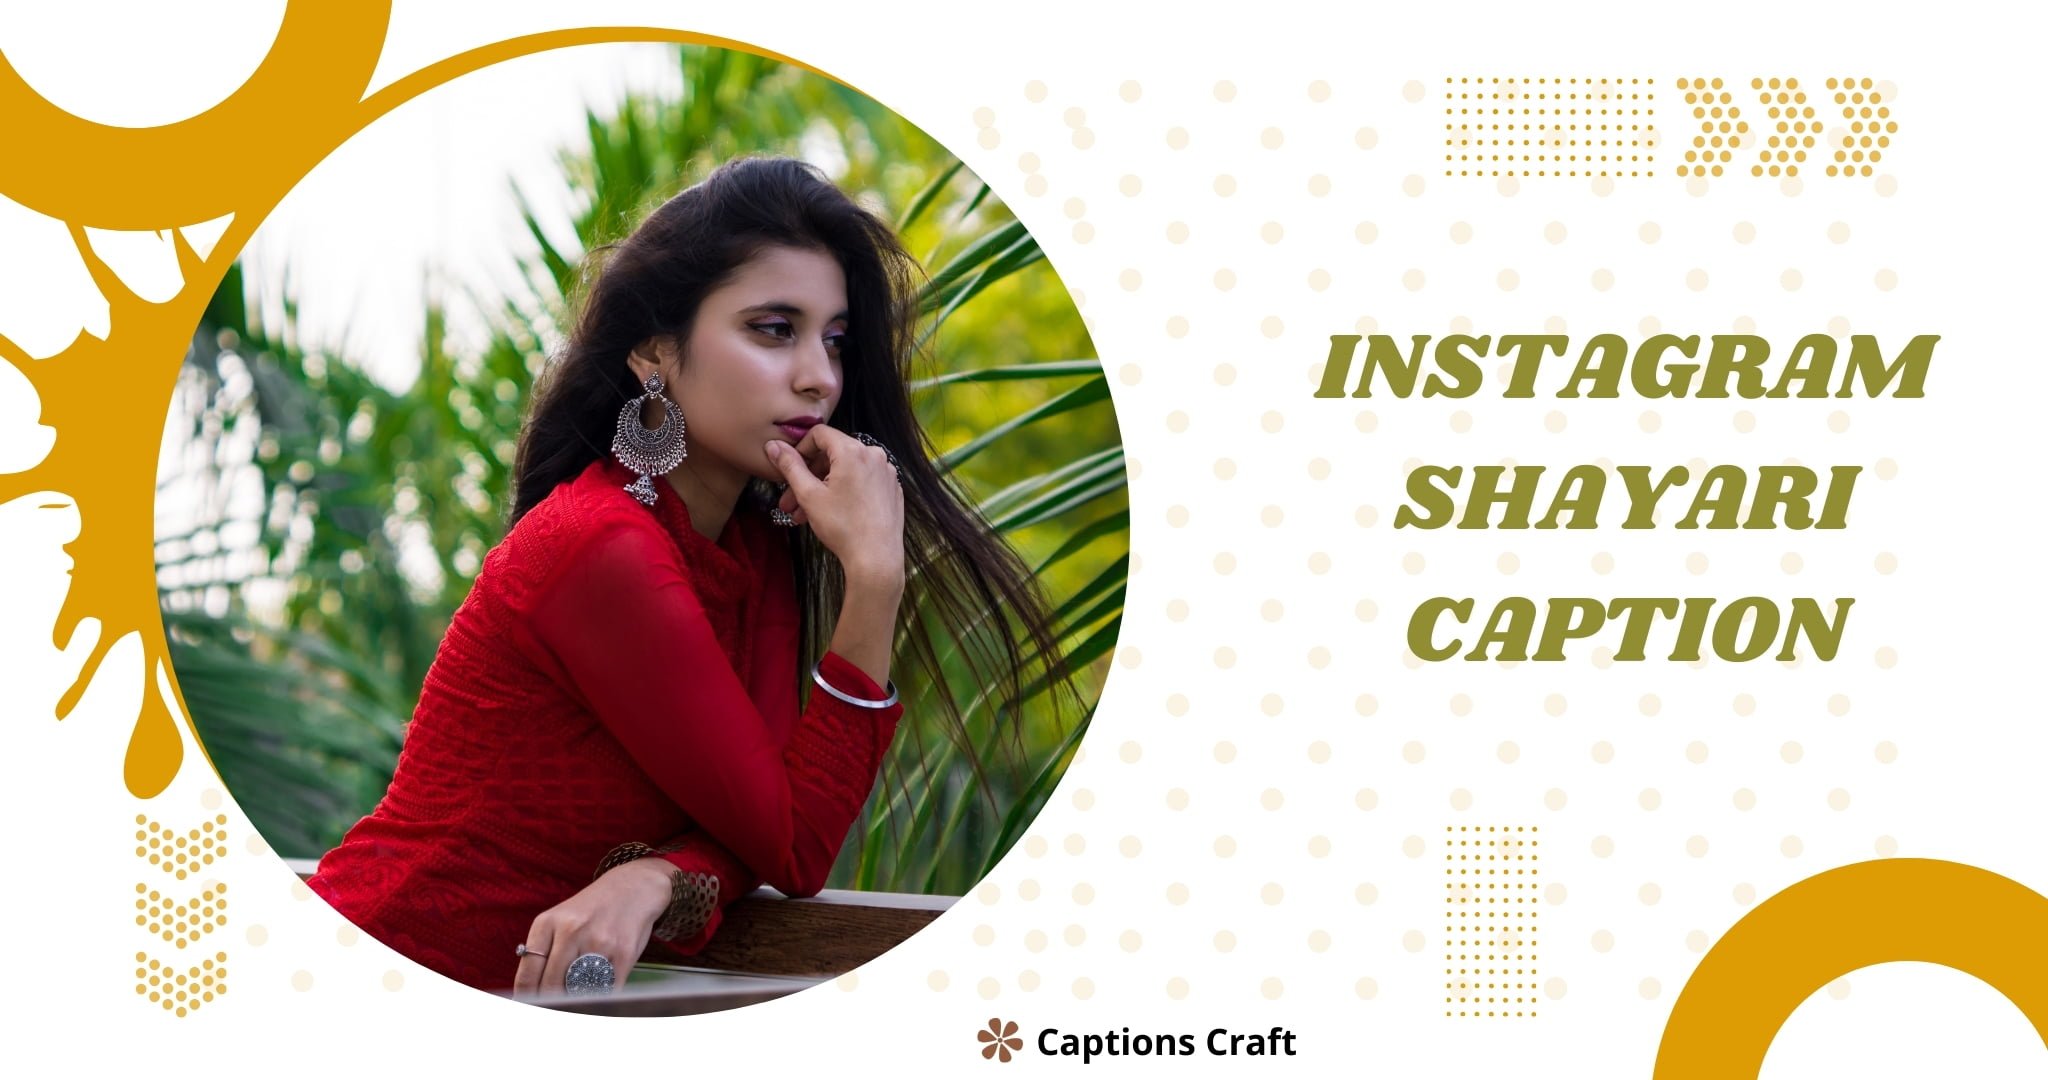 A collection of Instagram shayari captions, perfect for adding poetic expressions to your social media posts.